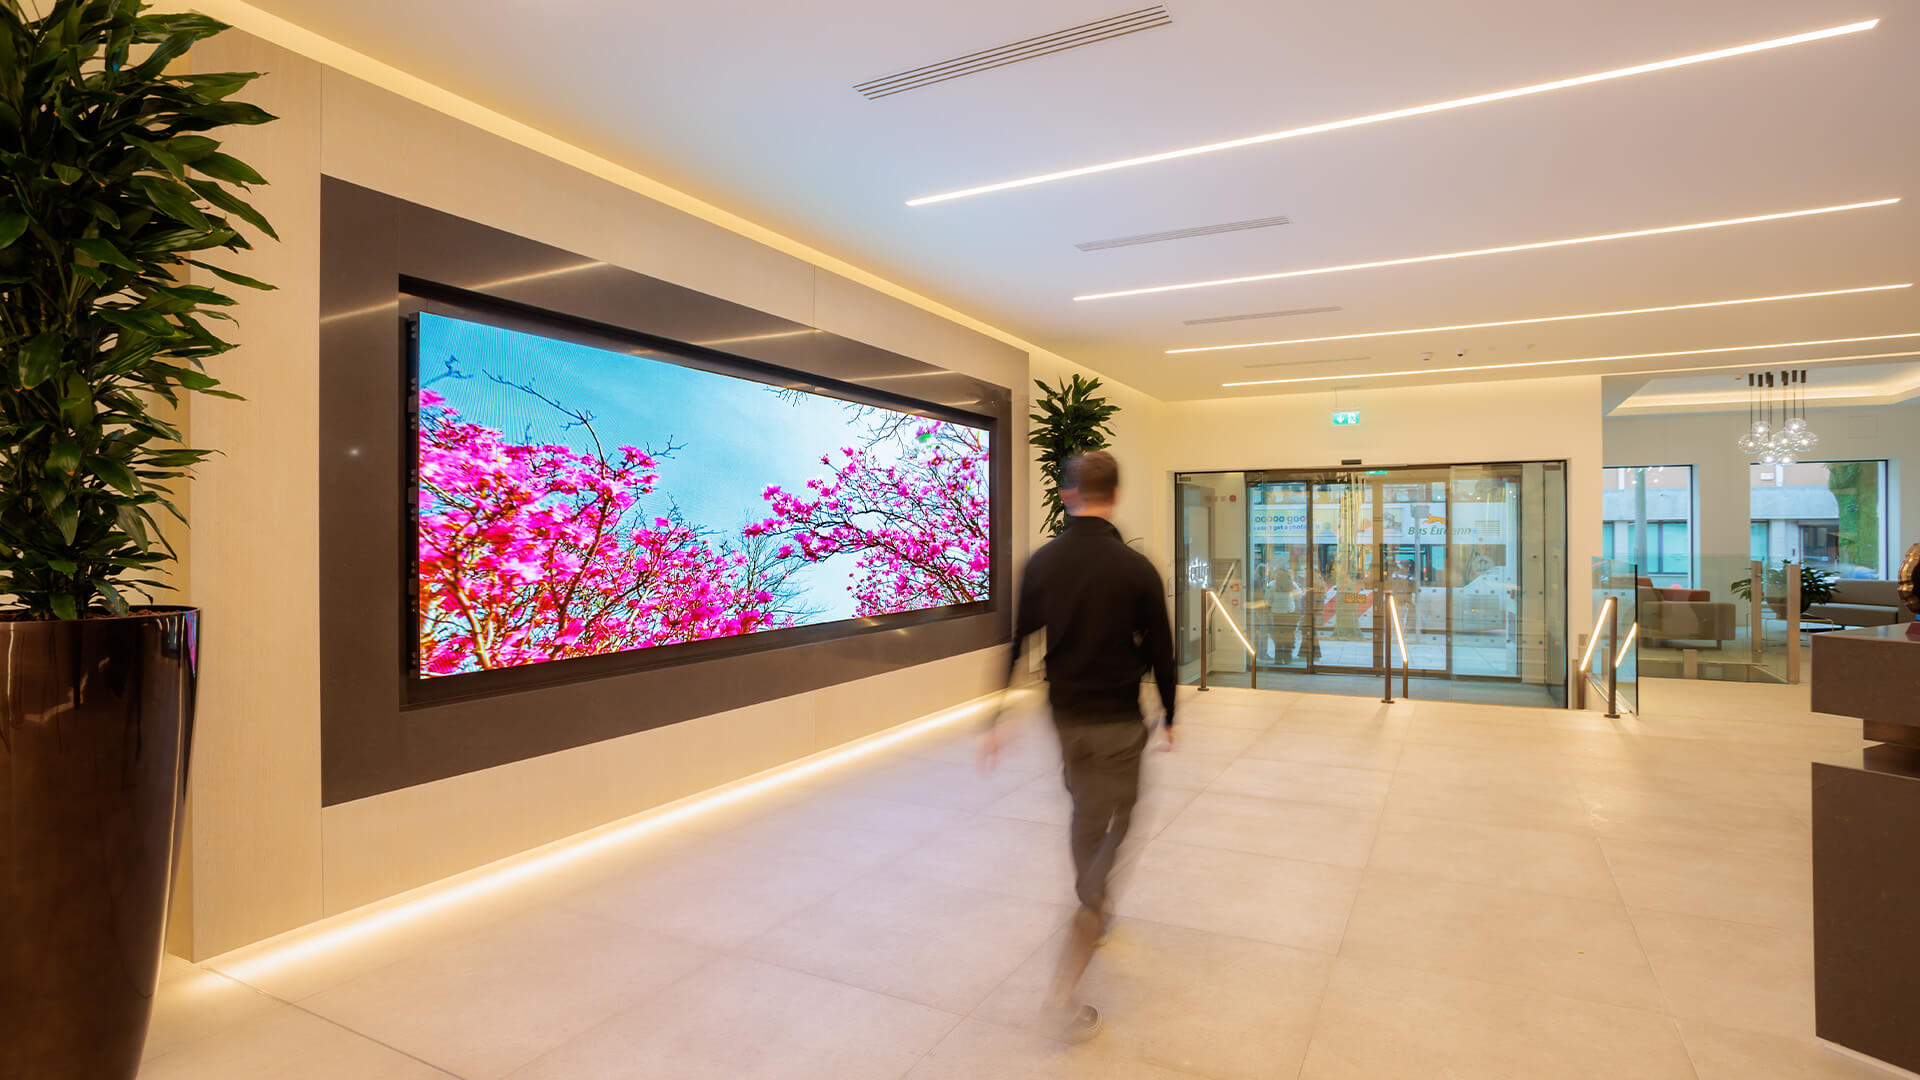 Building reception with wide videowall and passr-by